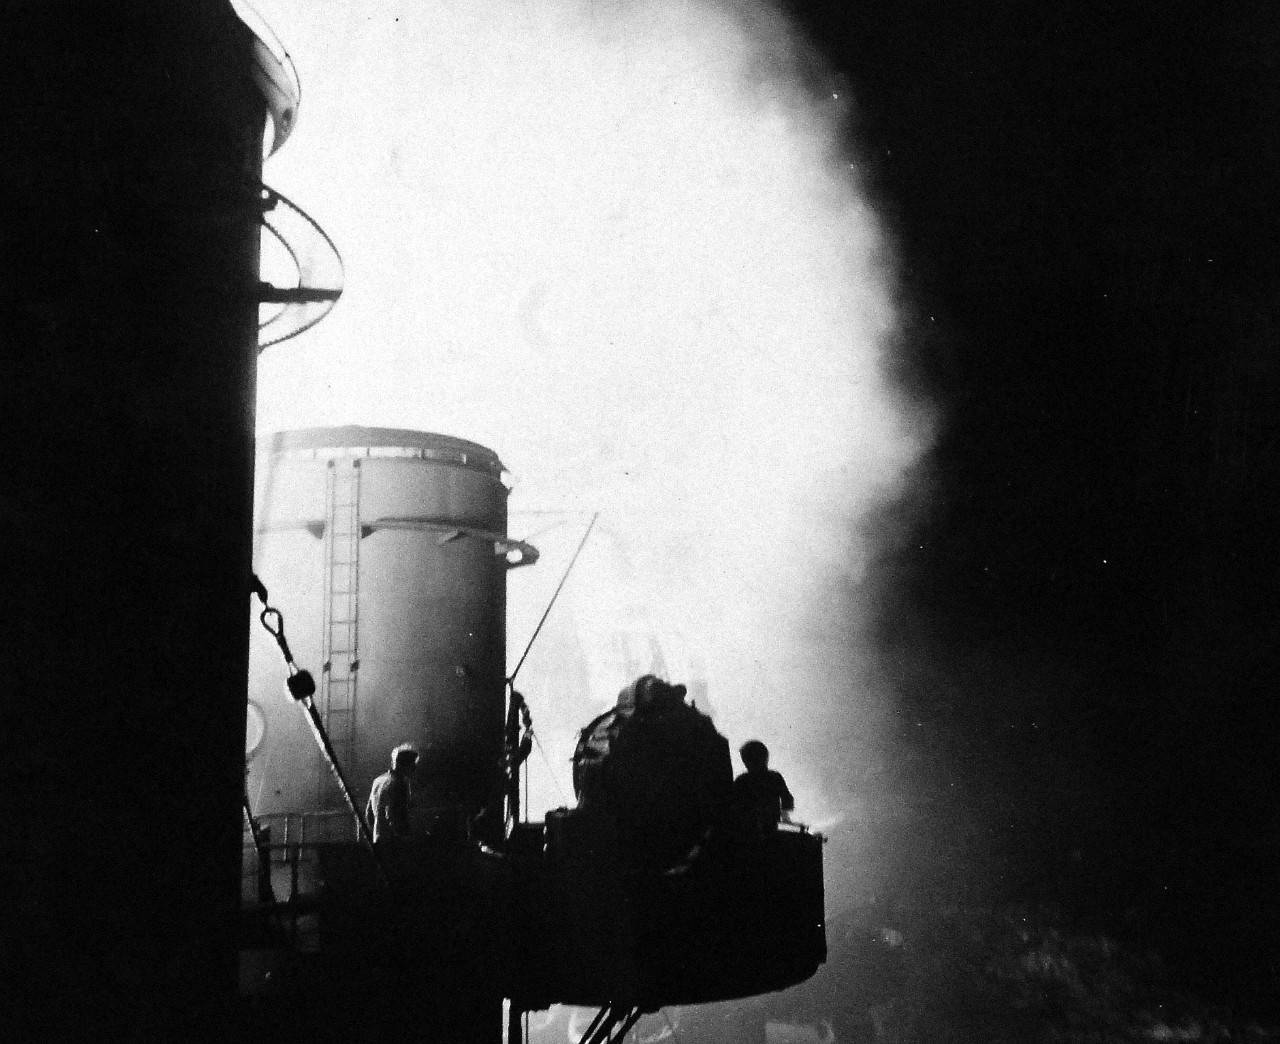 80-G-54562:  Battle of Kula Gulf, July 5-6, 1943.   Aboard USS Honolulu (CL-48).  Searchlight platform silhouetted against the glare from the firing guns.  Photograph, July 1943.   Official U.S. Navy photograph, now in the collections of the National Archives.   (2016/07/19).